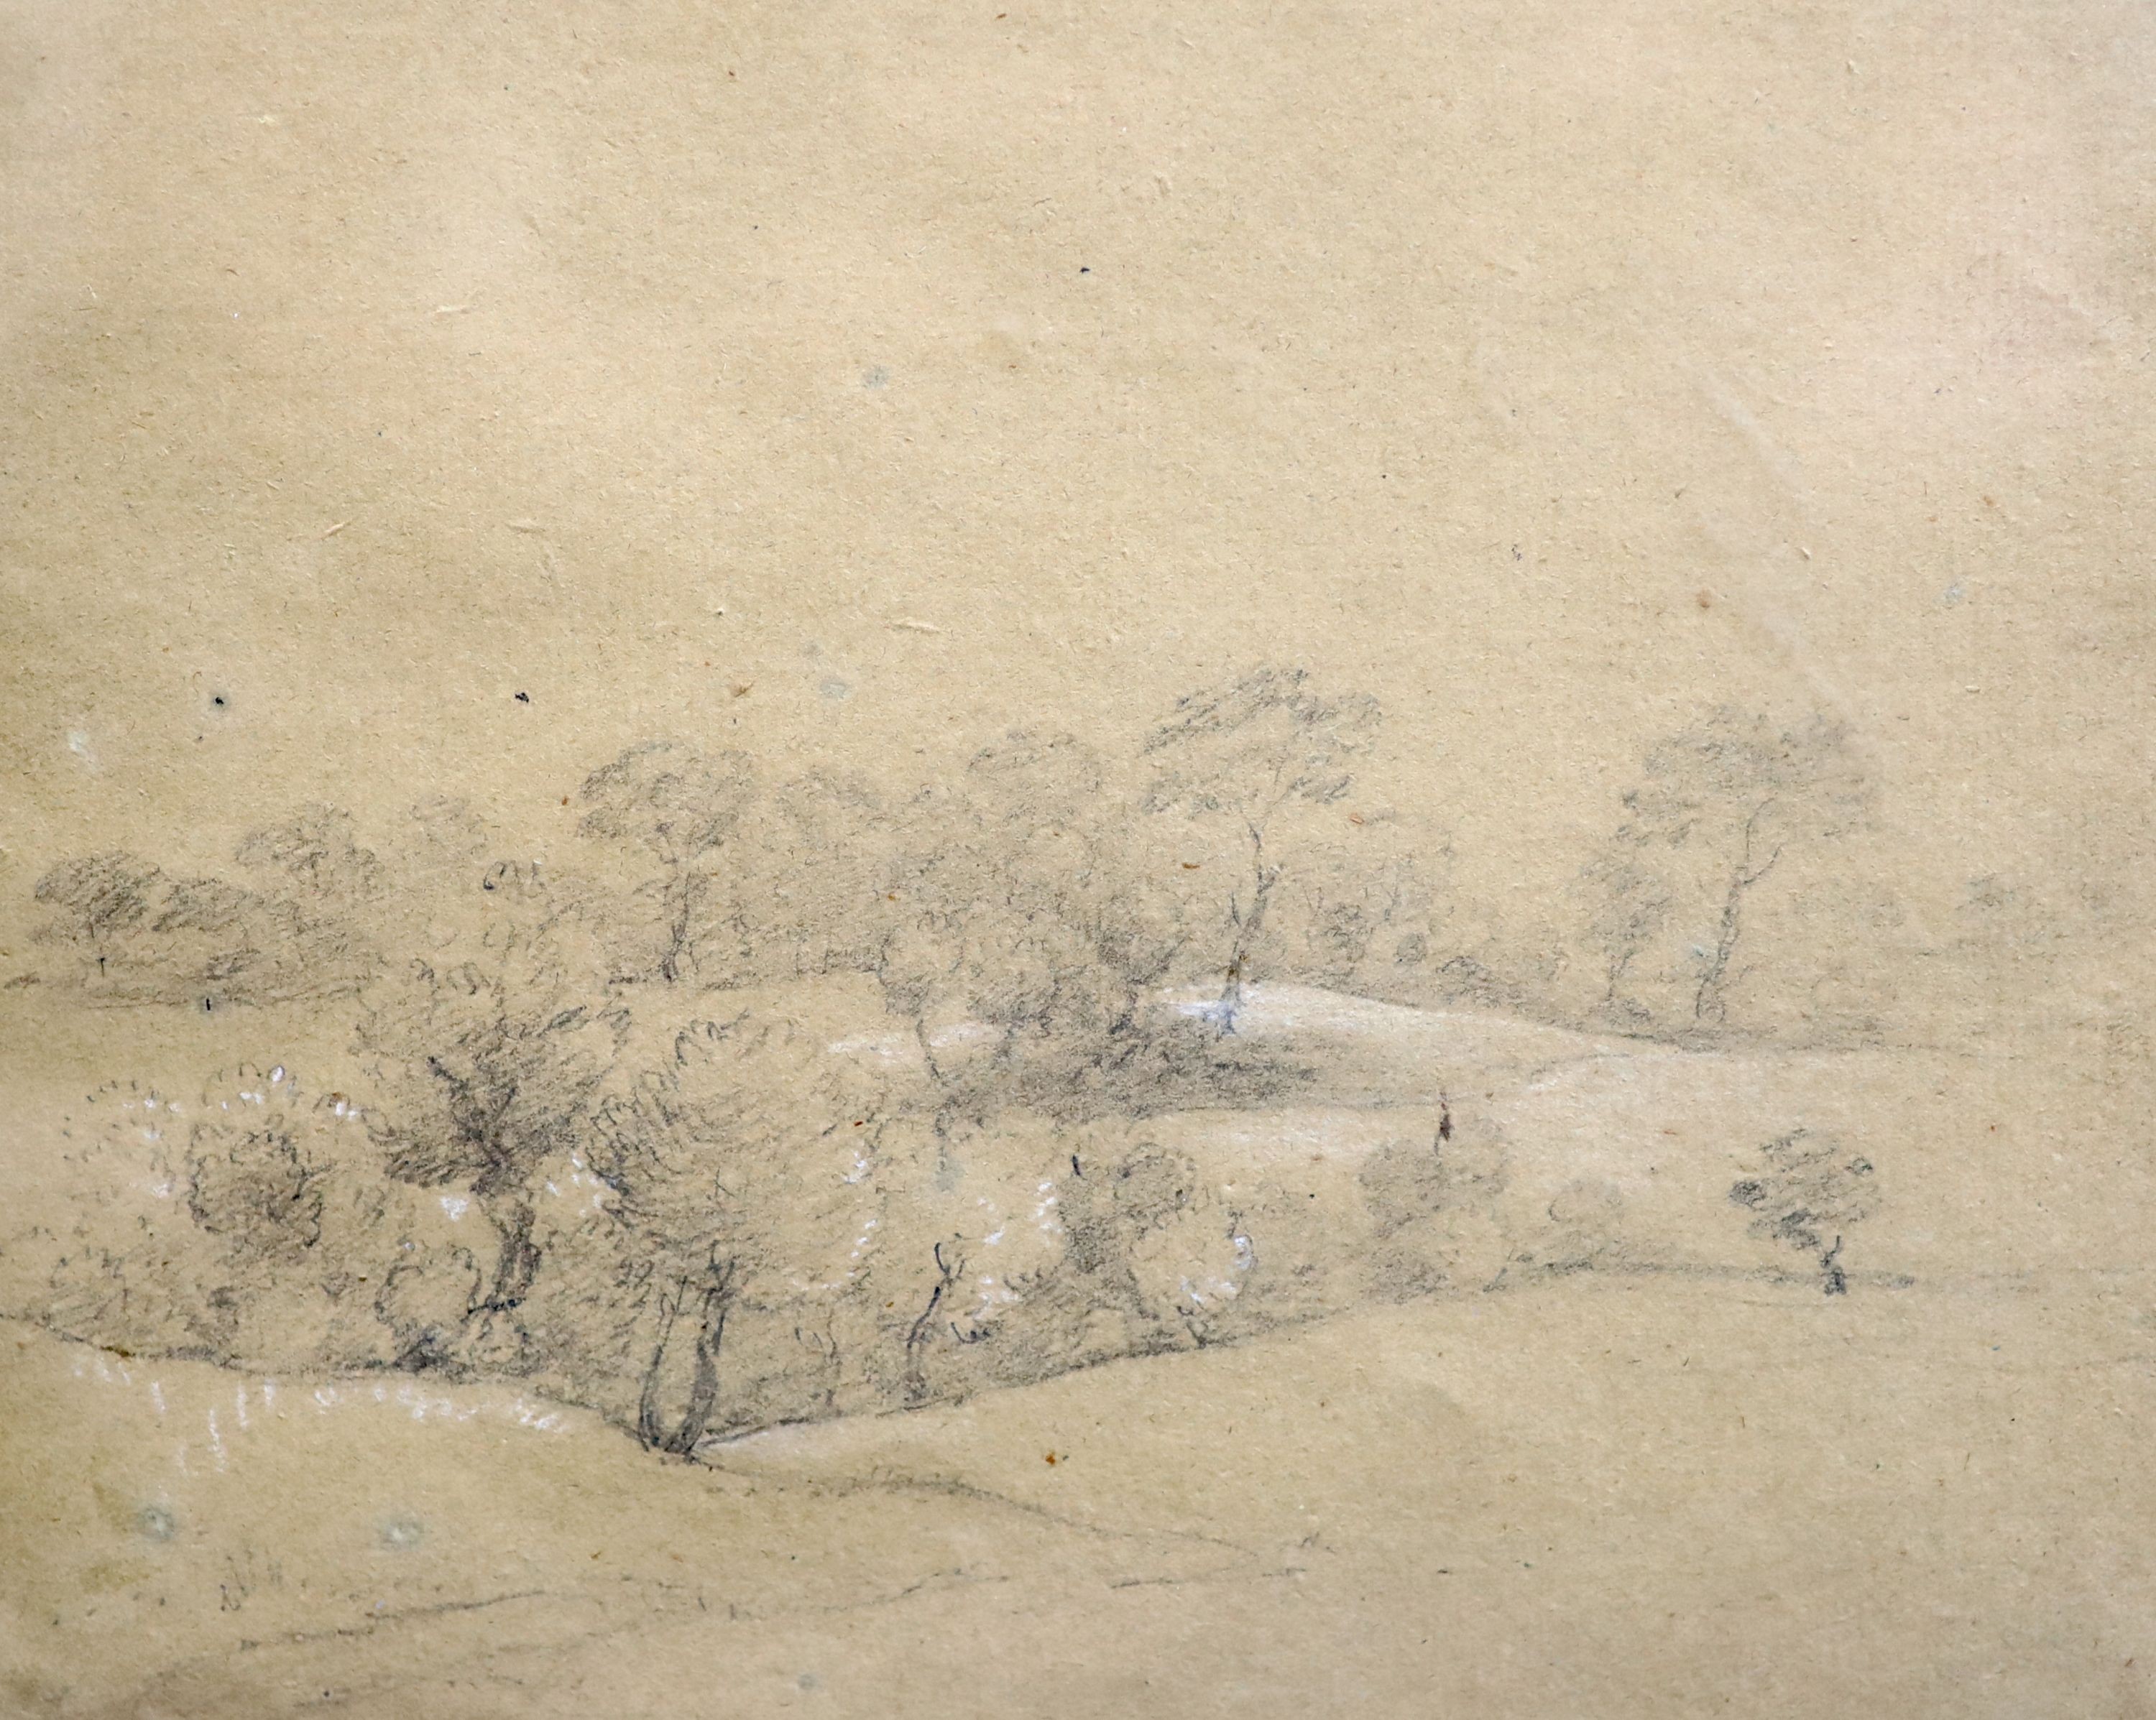 Attributed to Thomas Gainsborough (1727-1788), Trees on a hillside, Pencil and chalk on buff paper, 17.5 x 20.5cm.